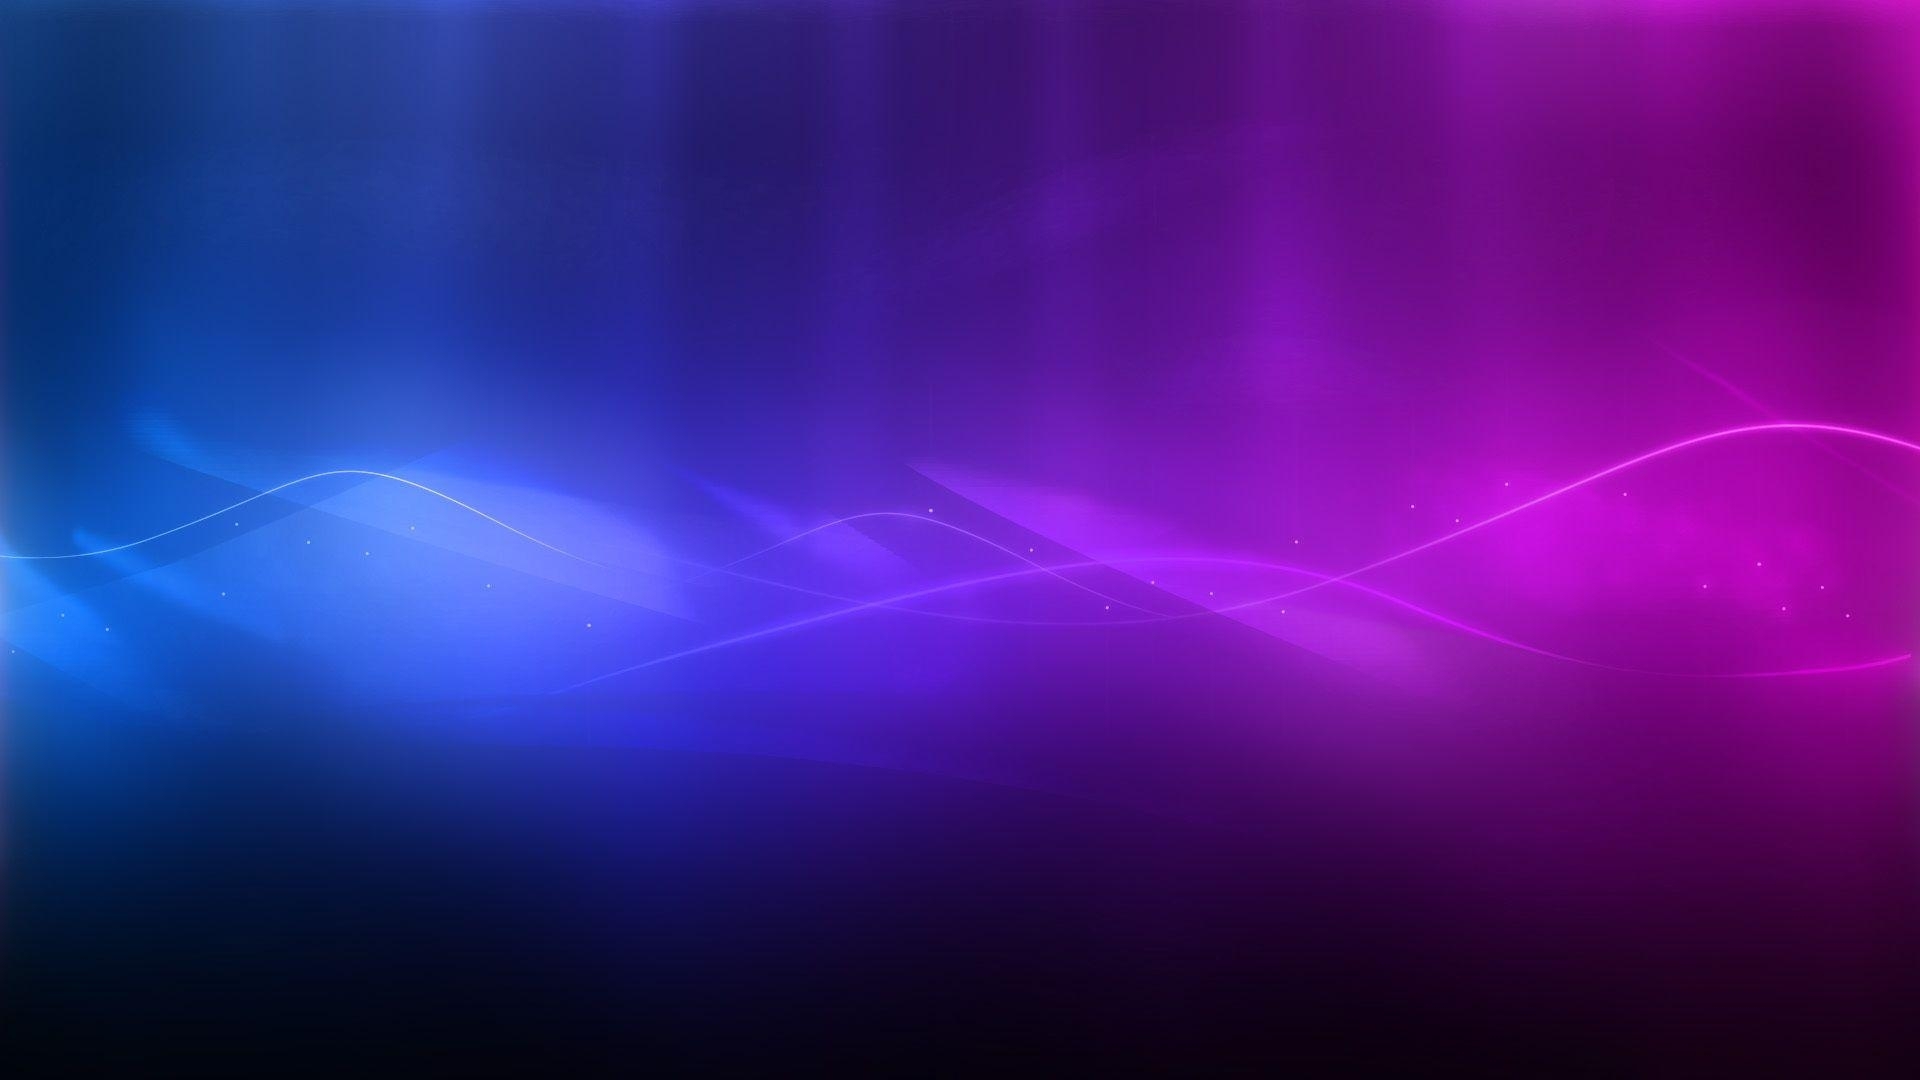 10 New Blue And Pink Backgrounds FULL HD 1920×1080 For PC Background